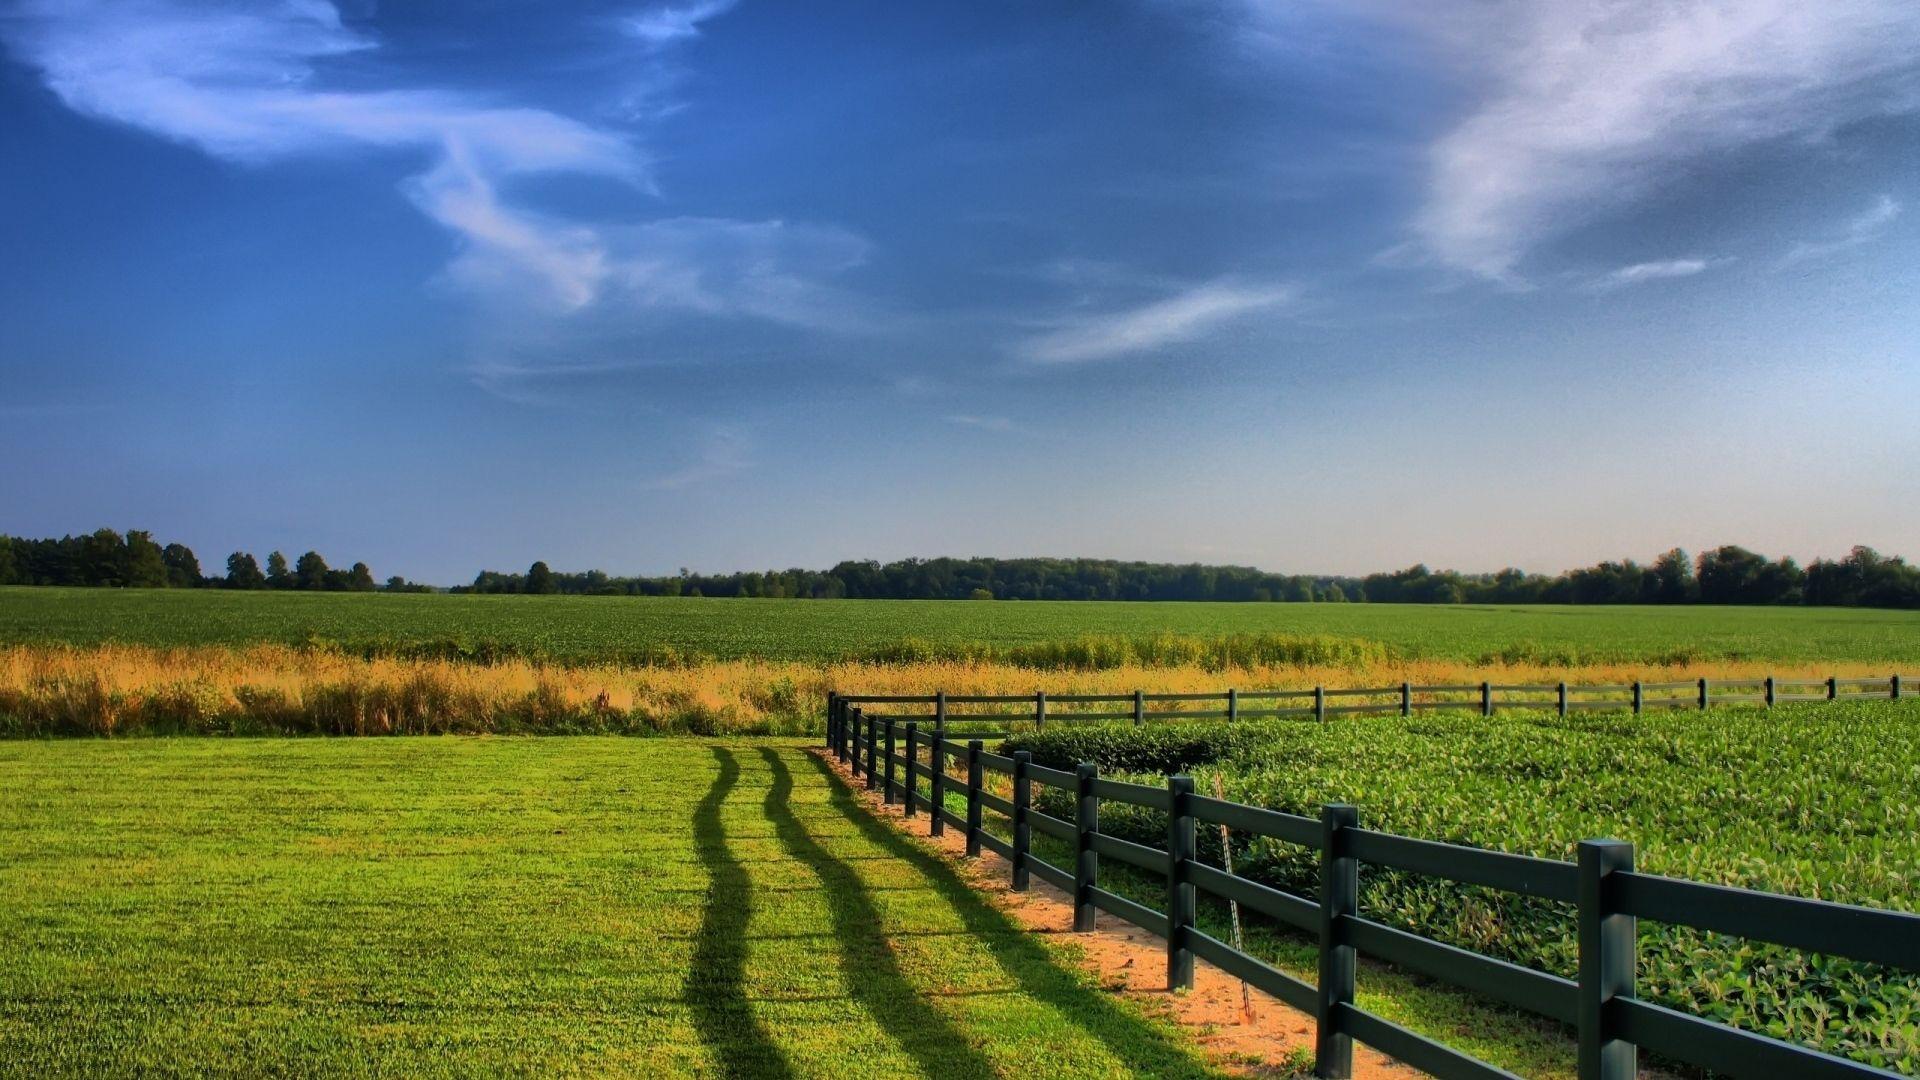 Download Wallpaper 1920x1080 Fence, Fields, Greens, Agriculture